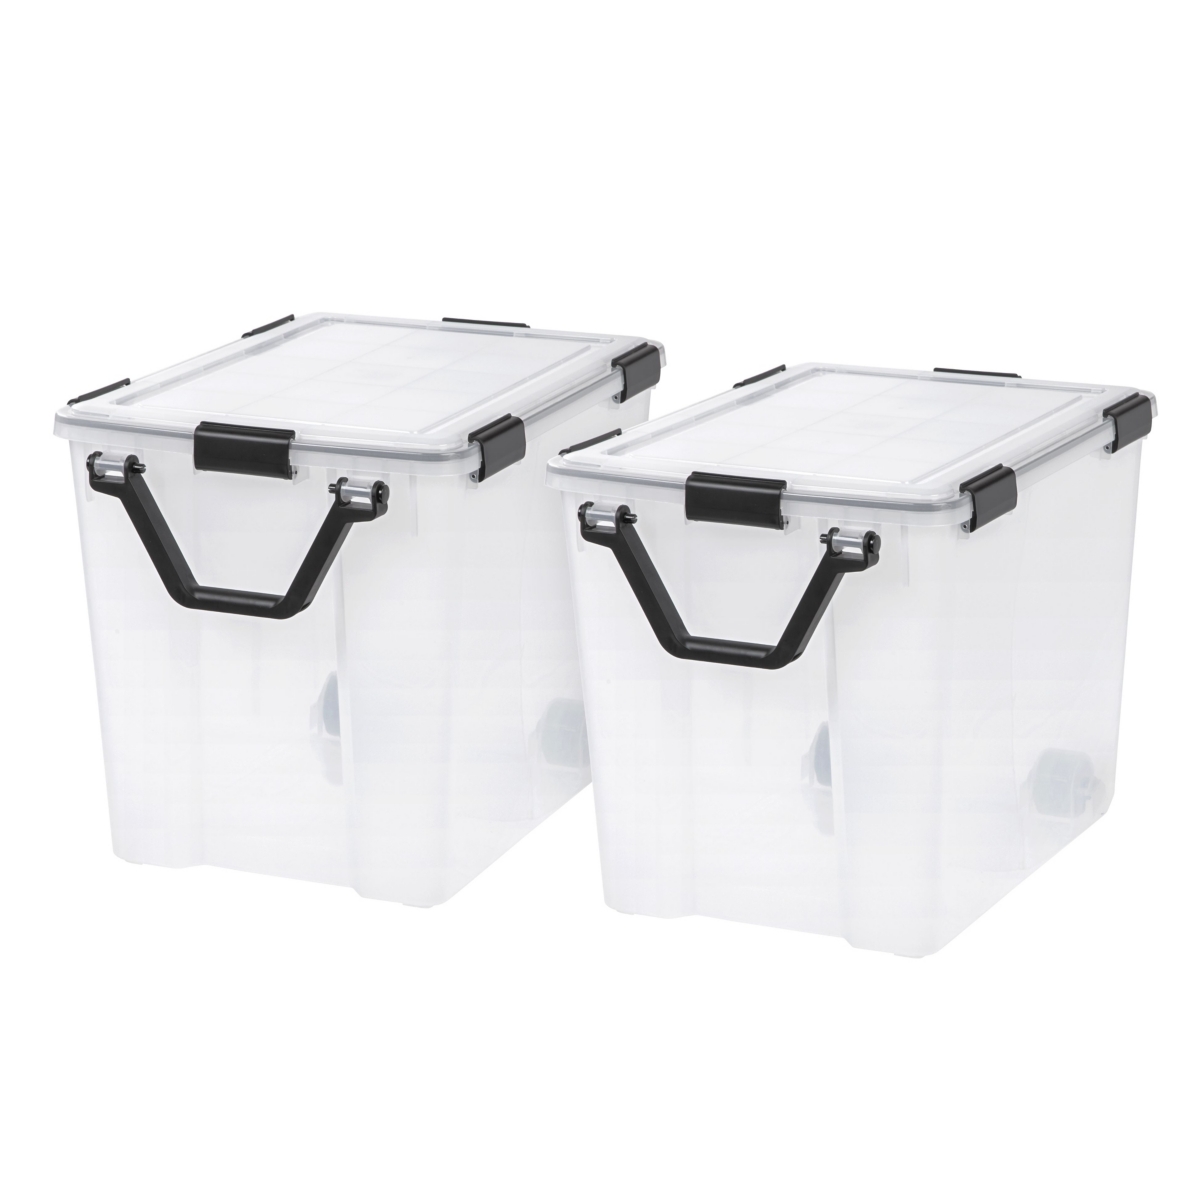 103 Qt Storage Box with Gasket Seal Lid, 2 Pack - Bpa-Free, Made in Usa - Heavy Duty Moving Containers with Tight Latch, Weather Proof Tote B